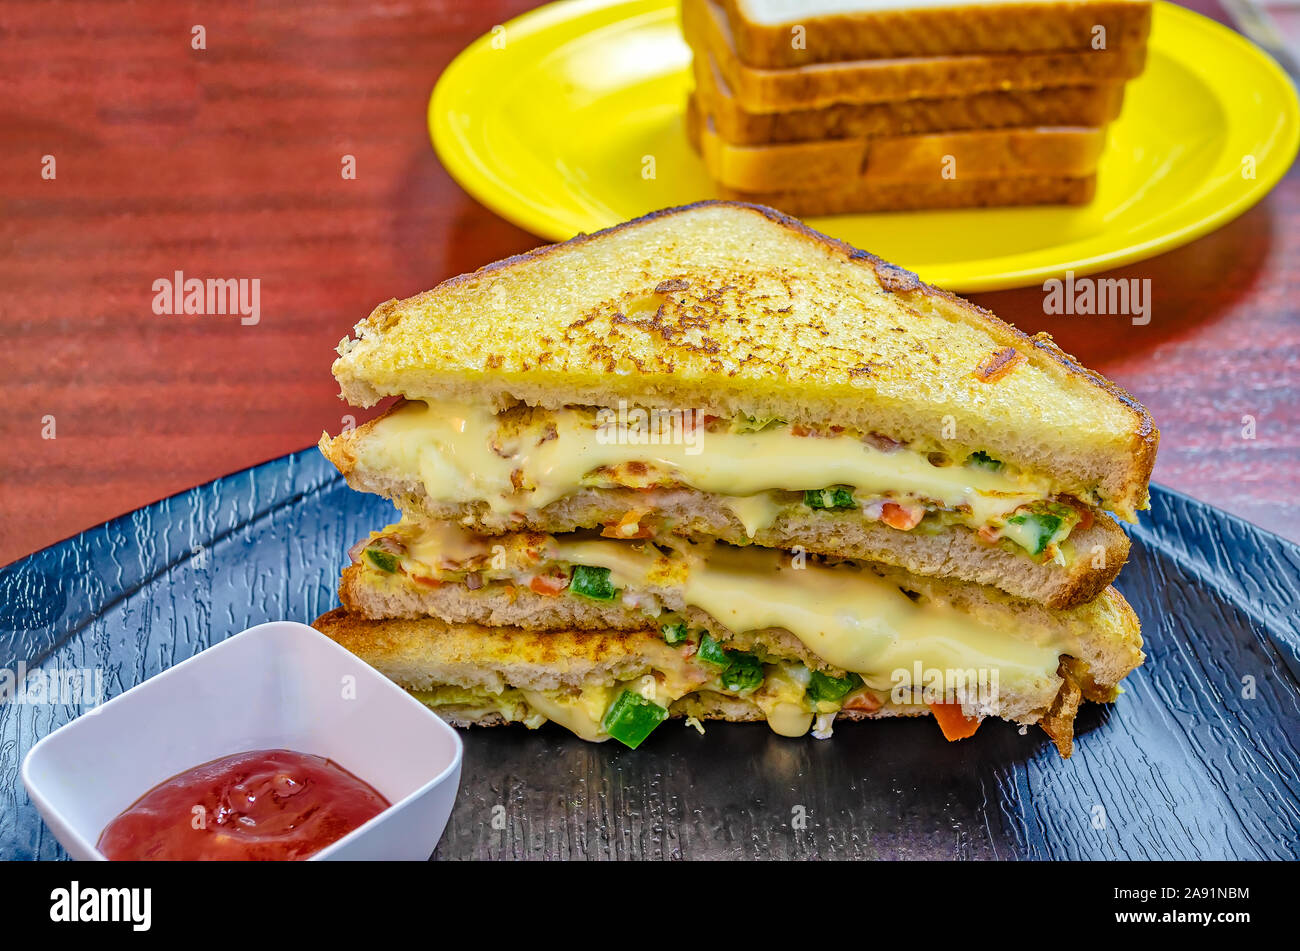 Three sets of stacked egg sandwiches with dripping cheese in a black plate along with ketchup and more slices in the background Stock Photo